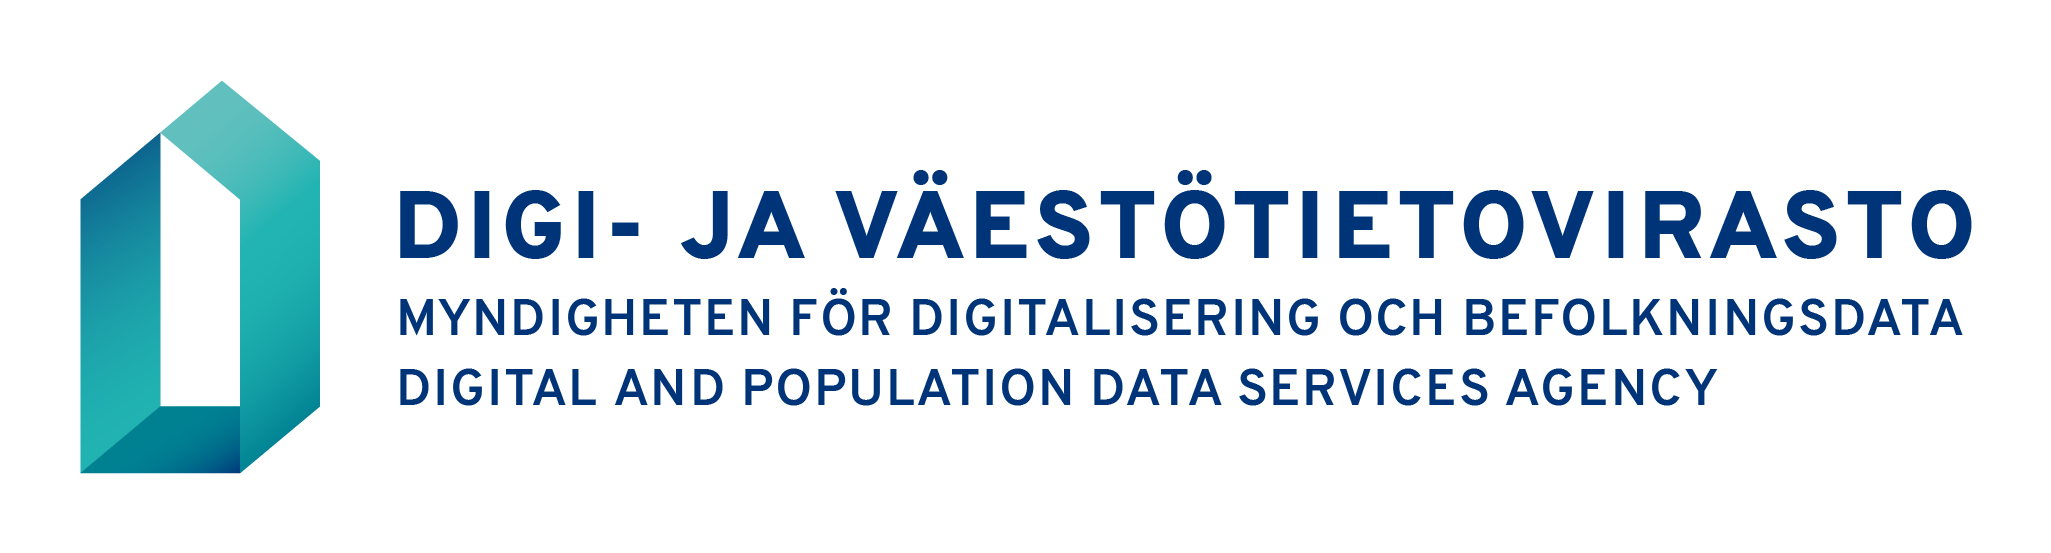 Digital and Population Data services Agency